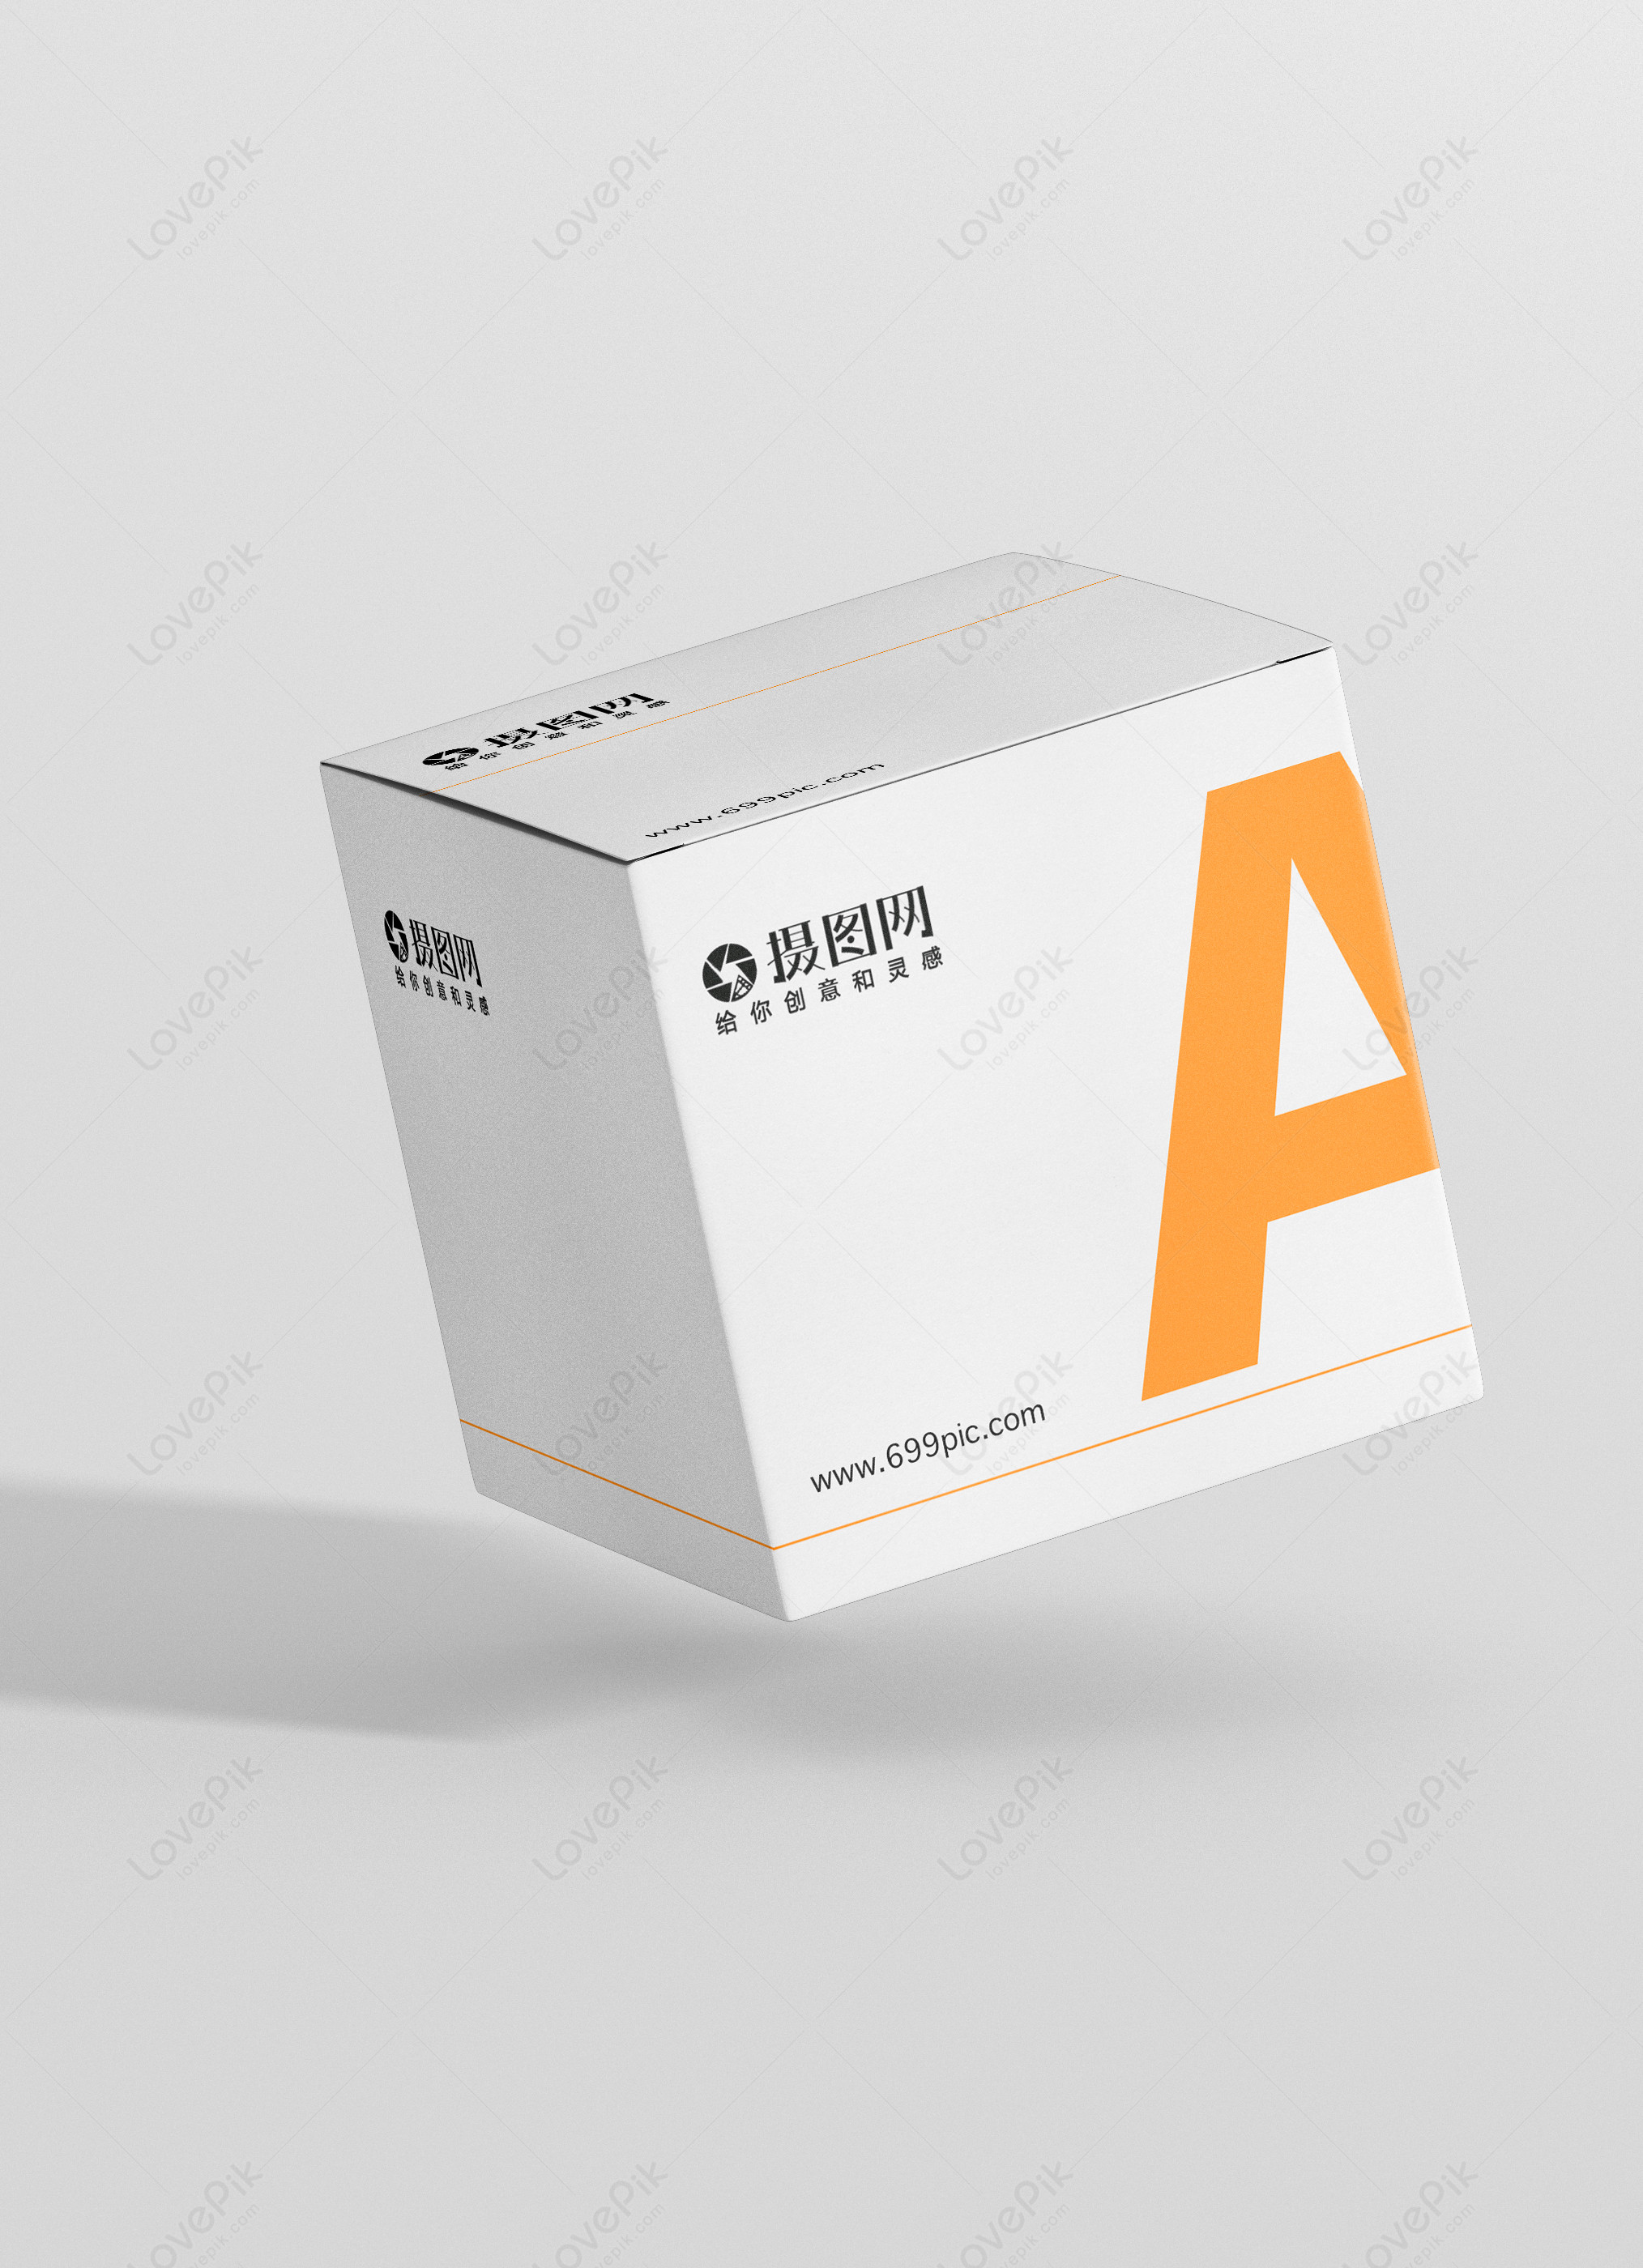 Download Square box mockup template image_picture free download ...